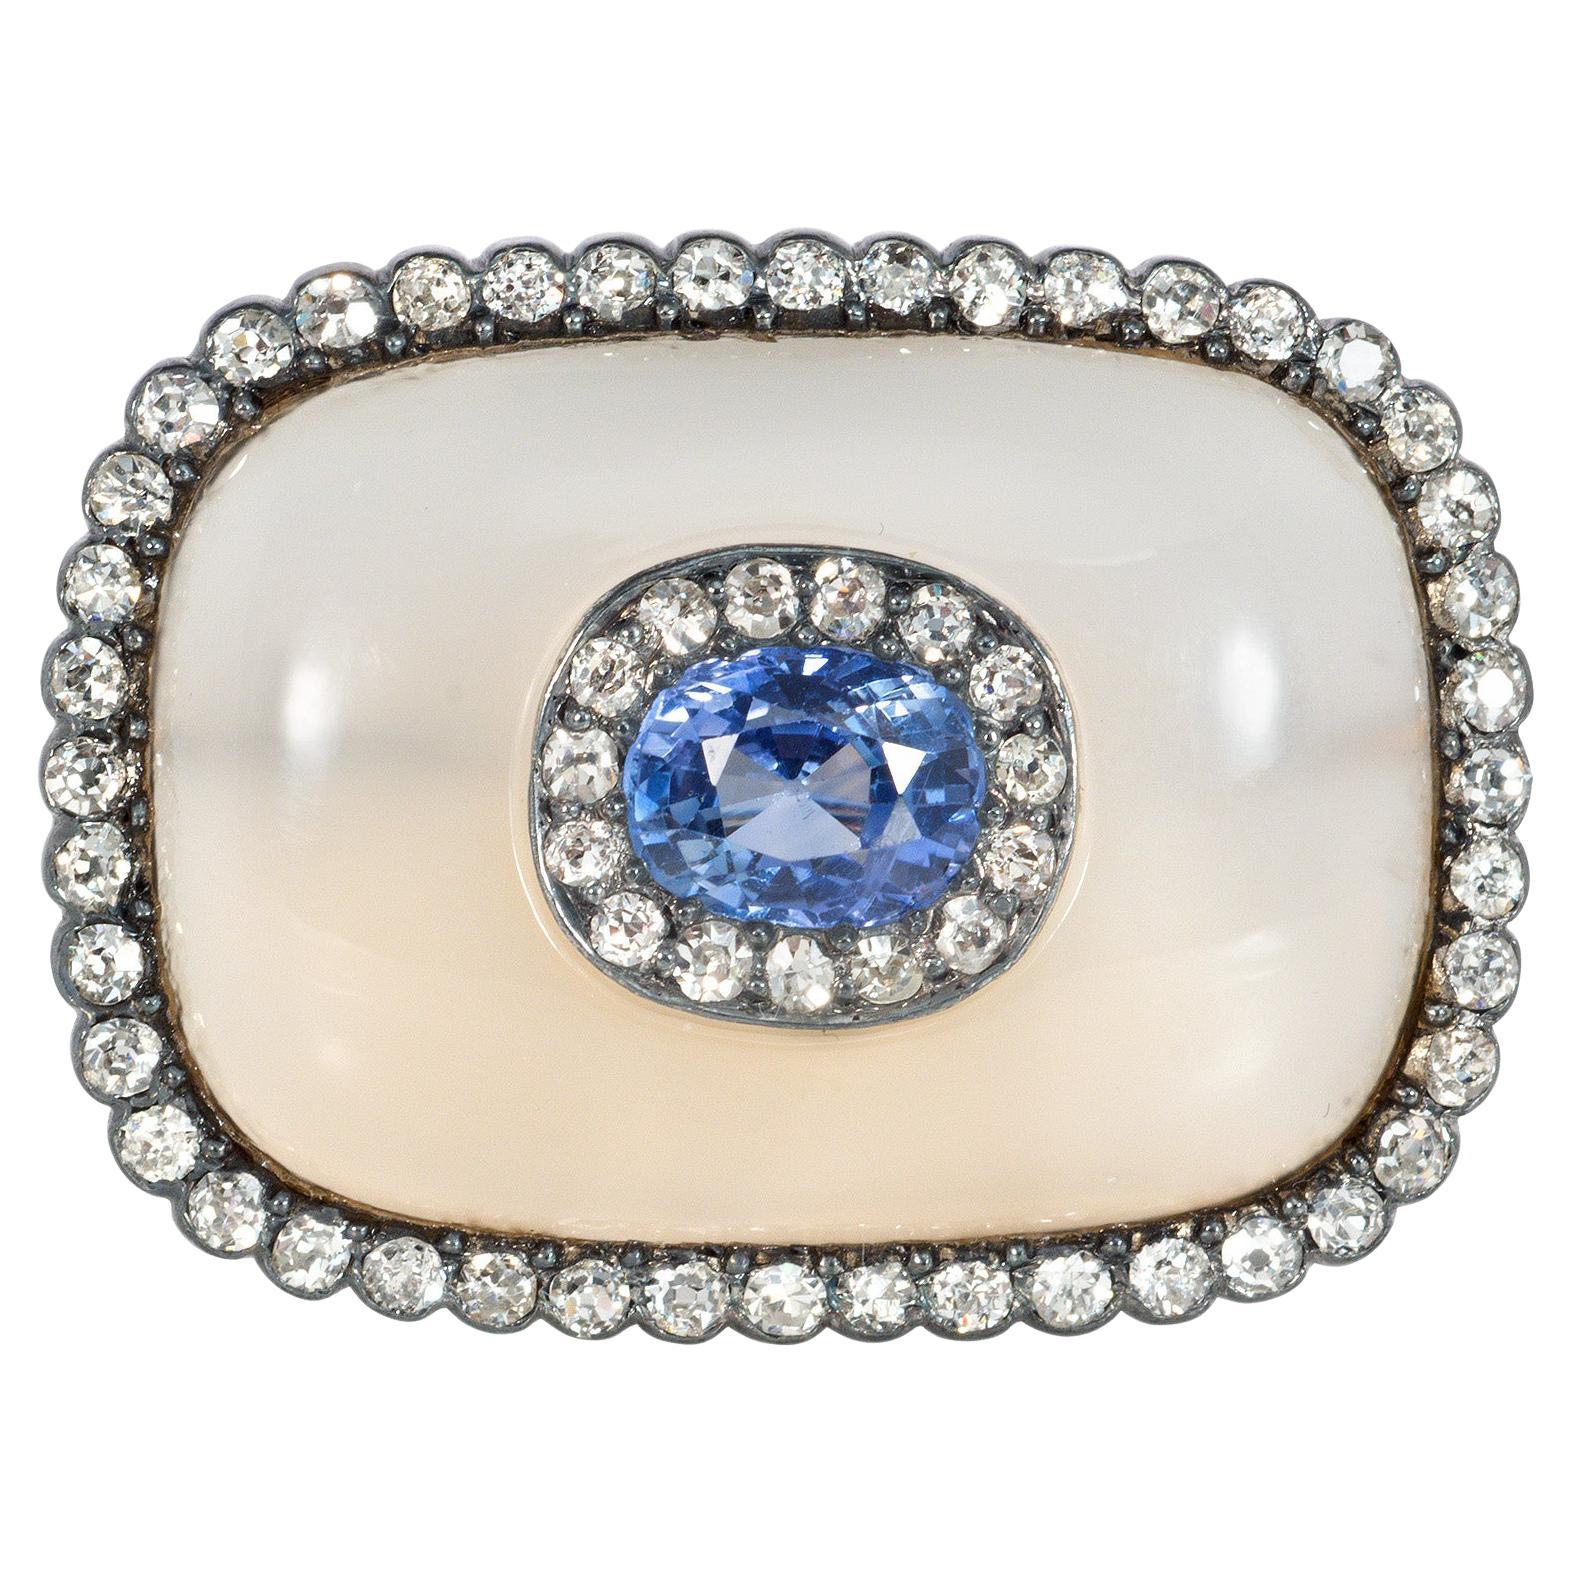 Antique Austrian Sapphire, Diamond, and Chalcedony Brooch with Cluster Center